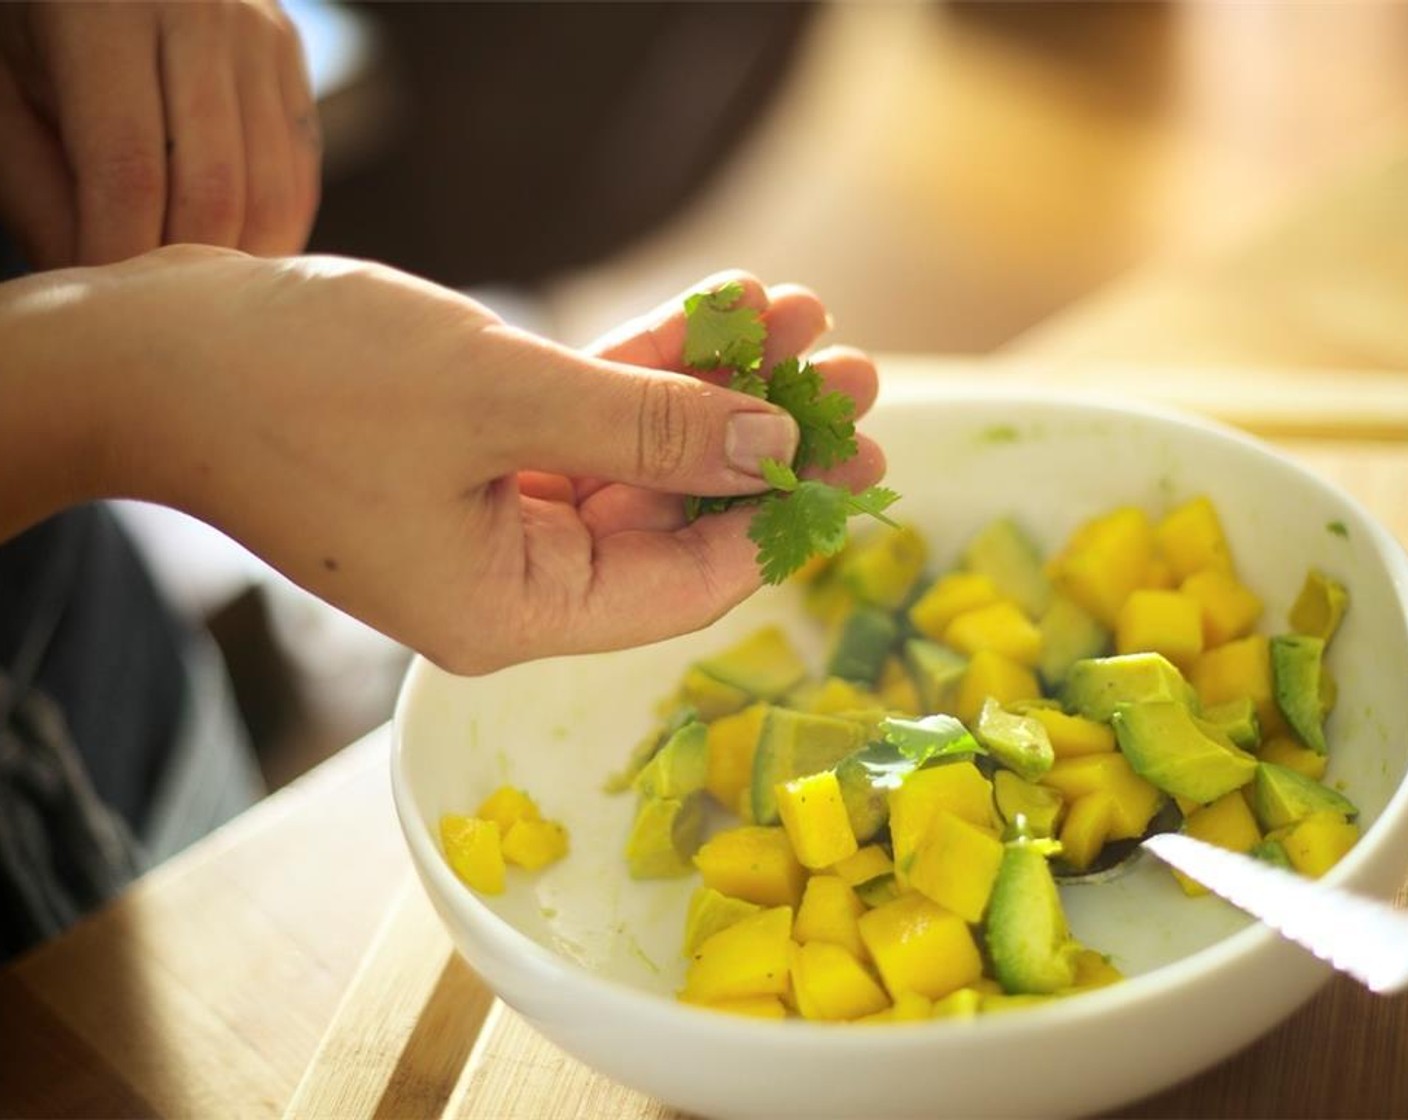 step 12 Use your knife's tip to score avocado flesh without piercing the skin, making squares, and then scoop it out into the bowl with mango. Toss together mango, avocado and half of the cilantro. Add Olive Oil (1/2 tsp), Salt (to taste) and Ground Black Pepper (to taste). Toss.